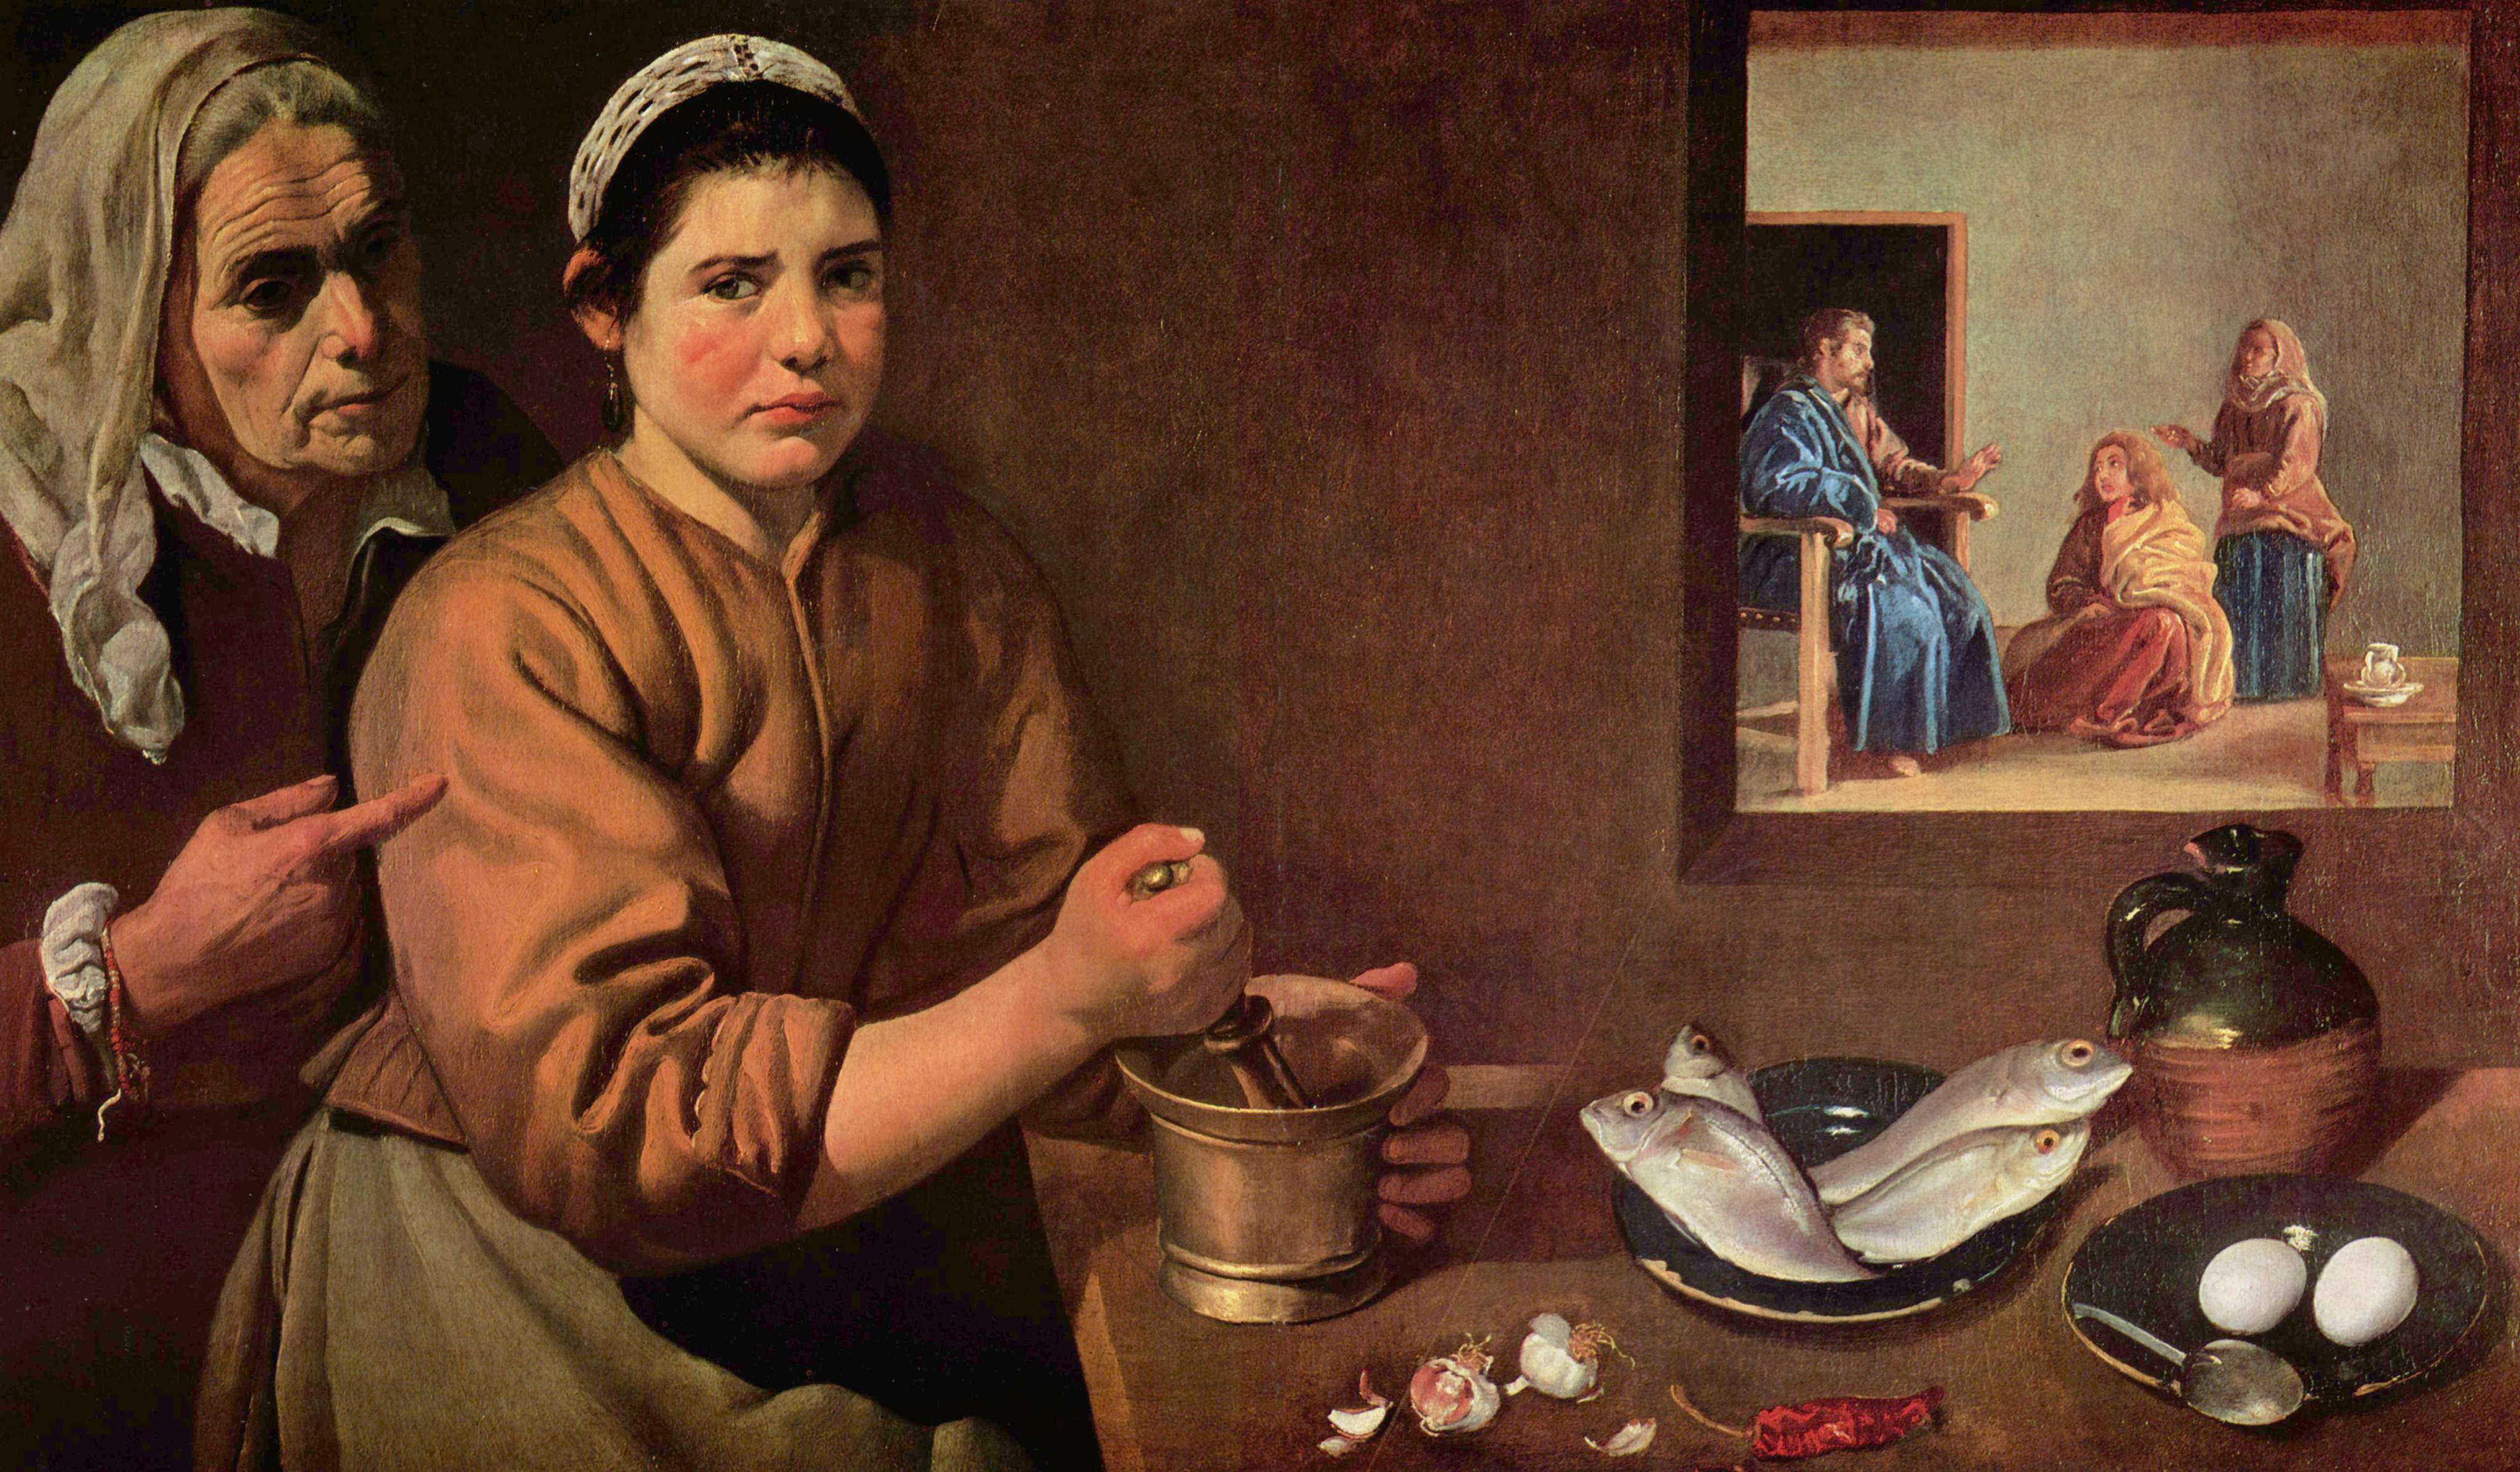 "Christ in the House of Martha and Mary" by Diego Velázquez (1618)